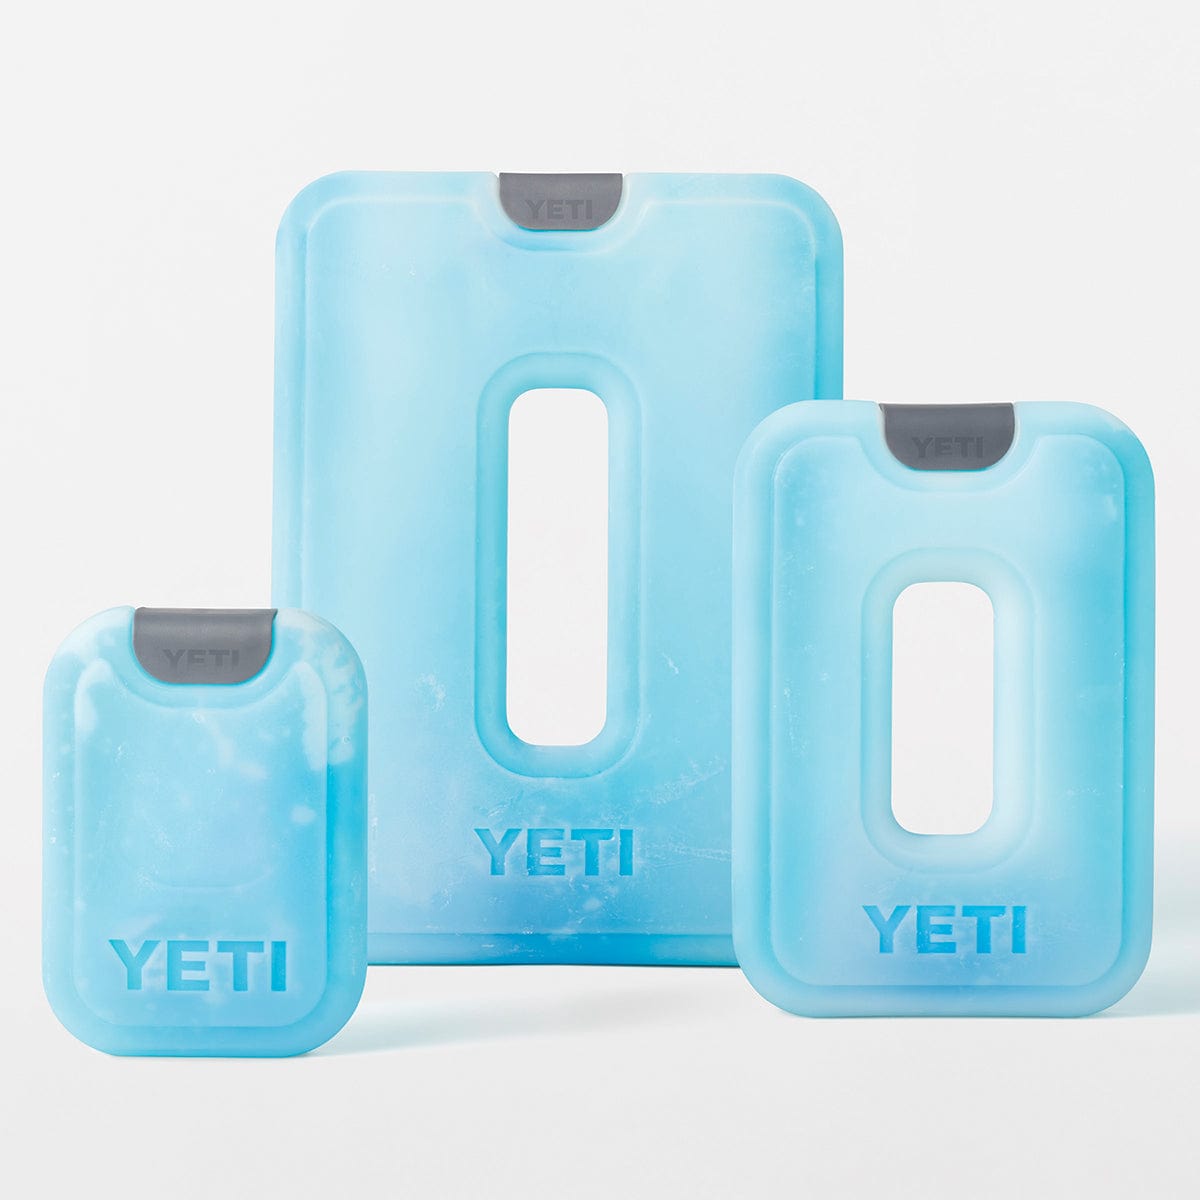 YETI thin ICE and what it fits 